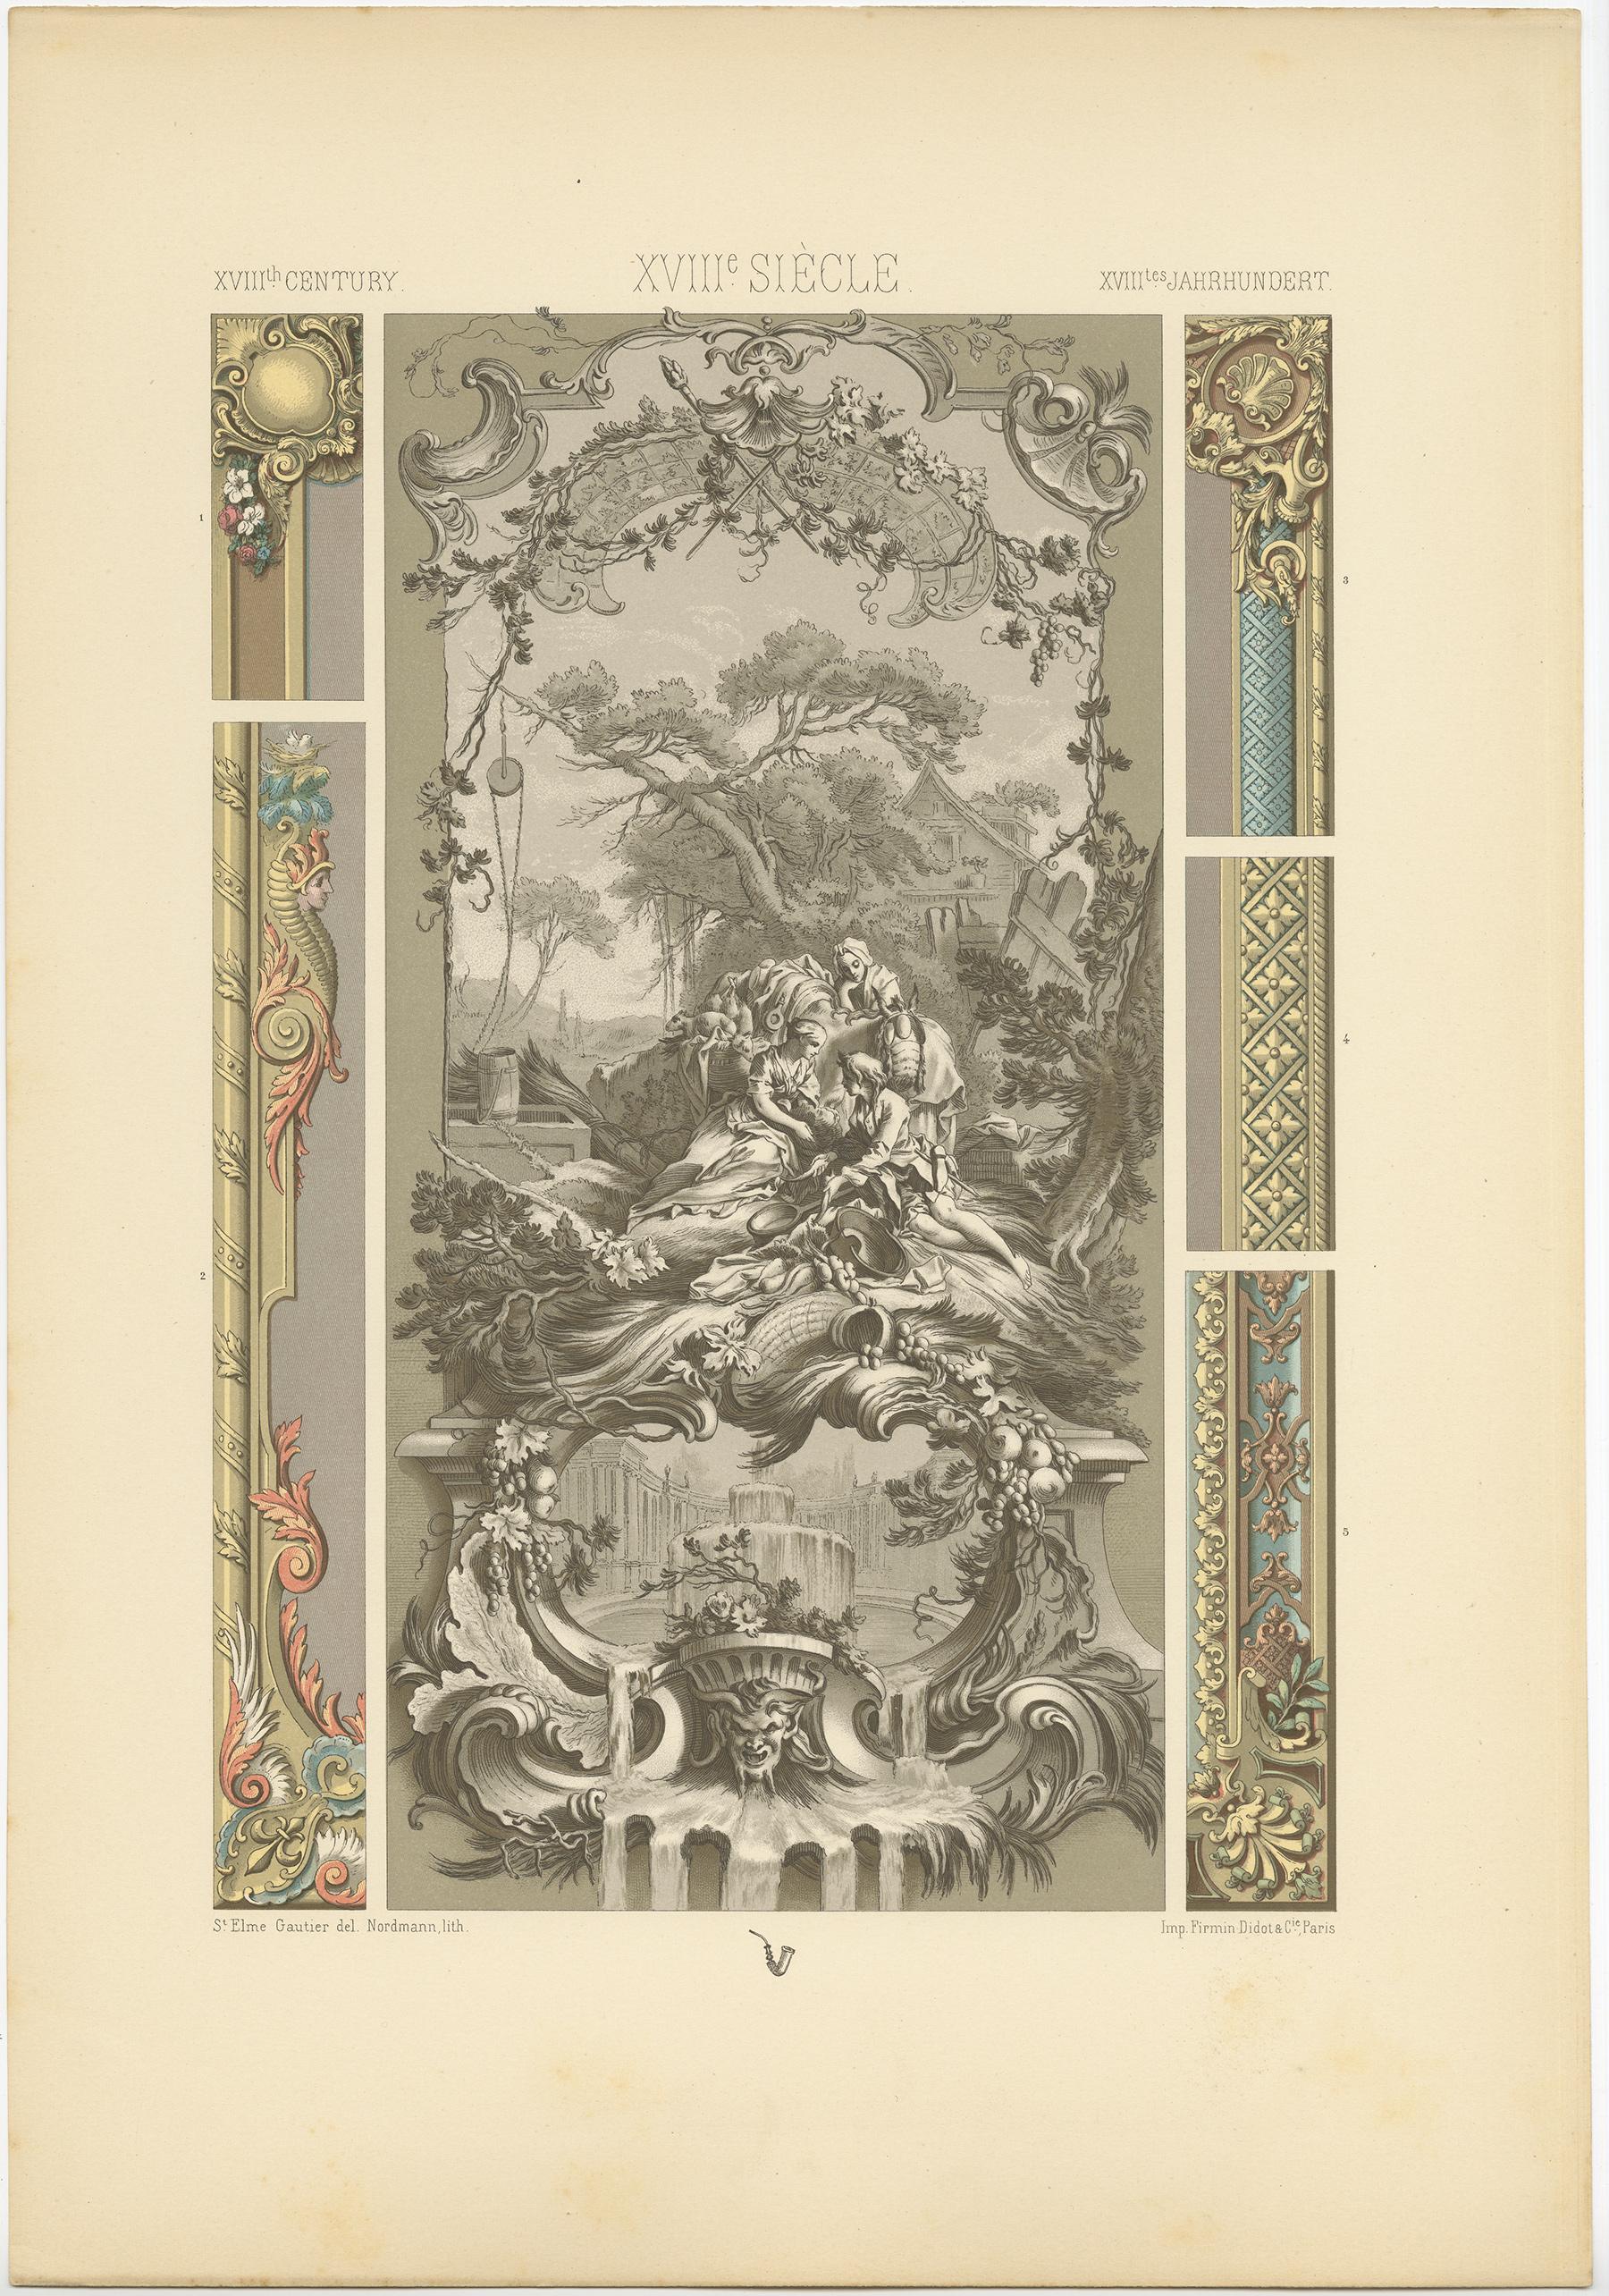 Antique print titled '18th Century - XIIIc Siècle -XVIIIles Jahrhundert'. Chromolithograph of decorative panel by Francois Boucher, and French tapestry borders ornaments. This print originates from 'l'Ornement Polychrome' by Auguste Racinet.